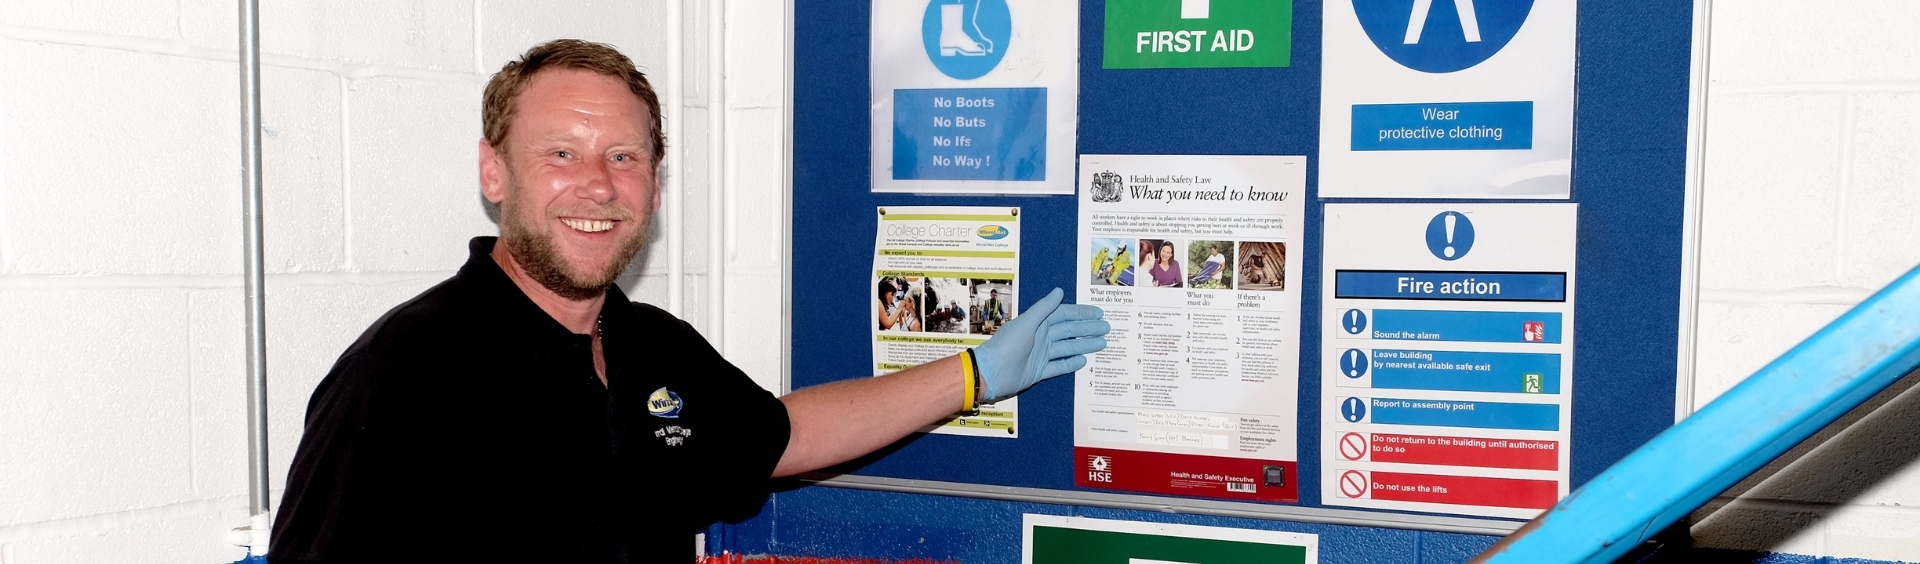 WMC Working Safely student pointing at noticeboard in classroom